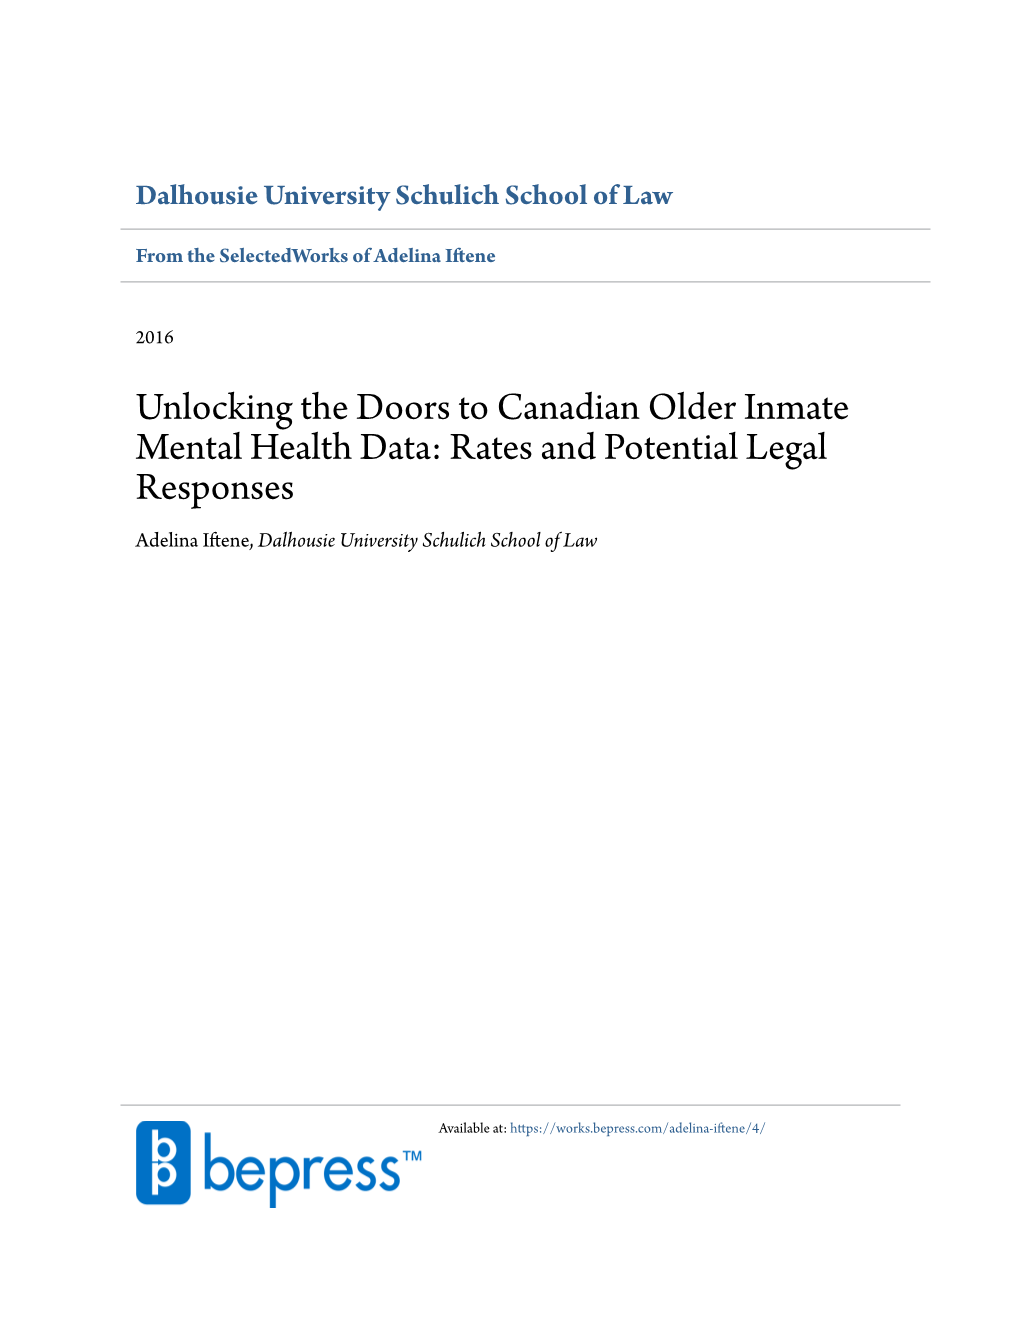 Unlocking the Doors to Canadian Older Inmate Mental Health Data: Rates and Potential Legal Responses Adelina Iftene, Dalhousie University Schulich School of Law